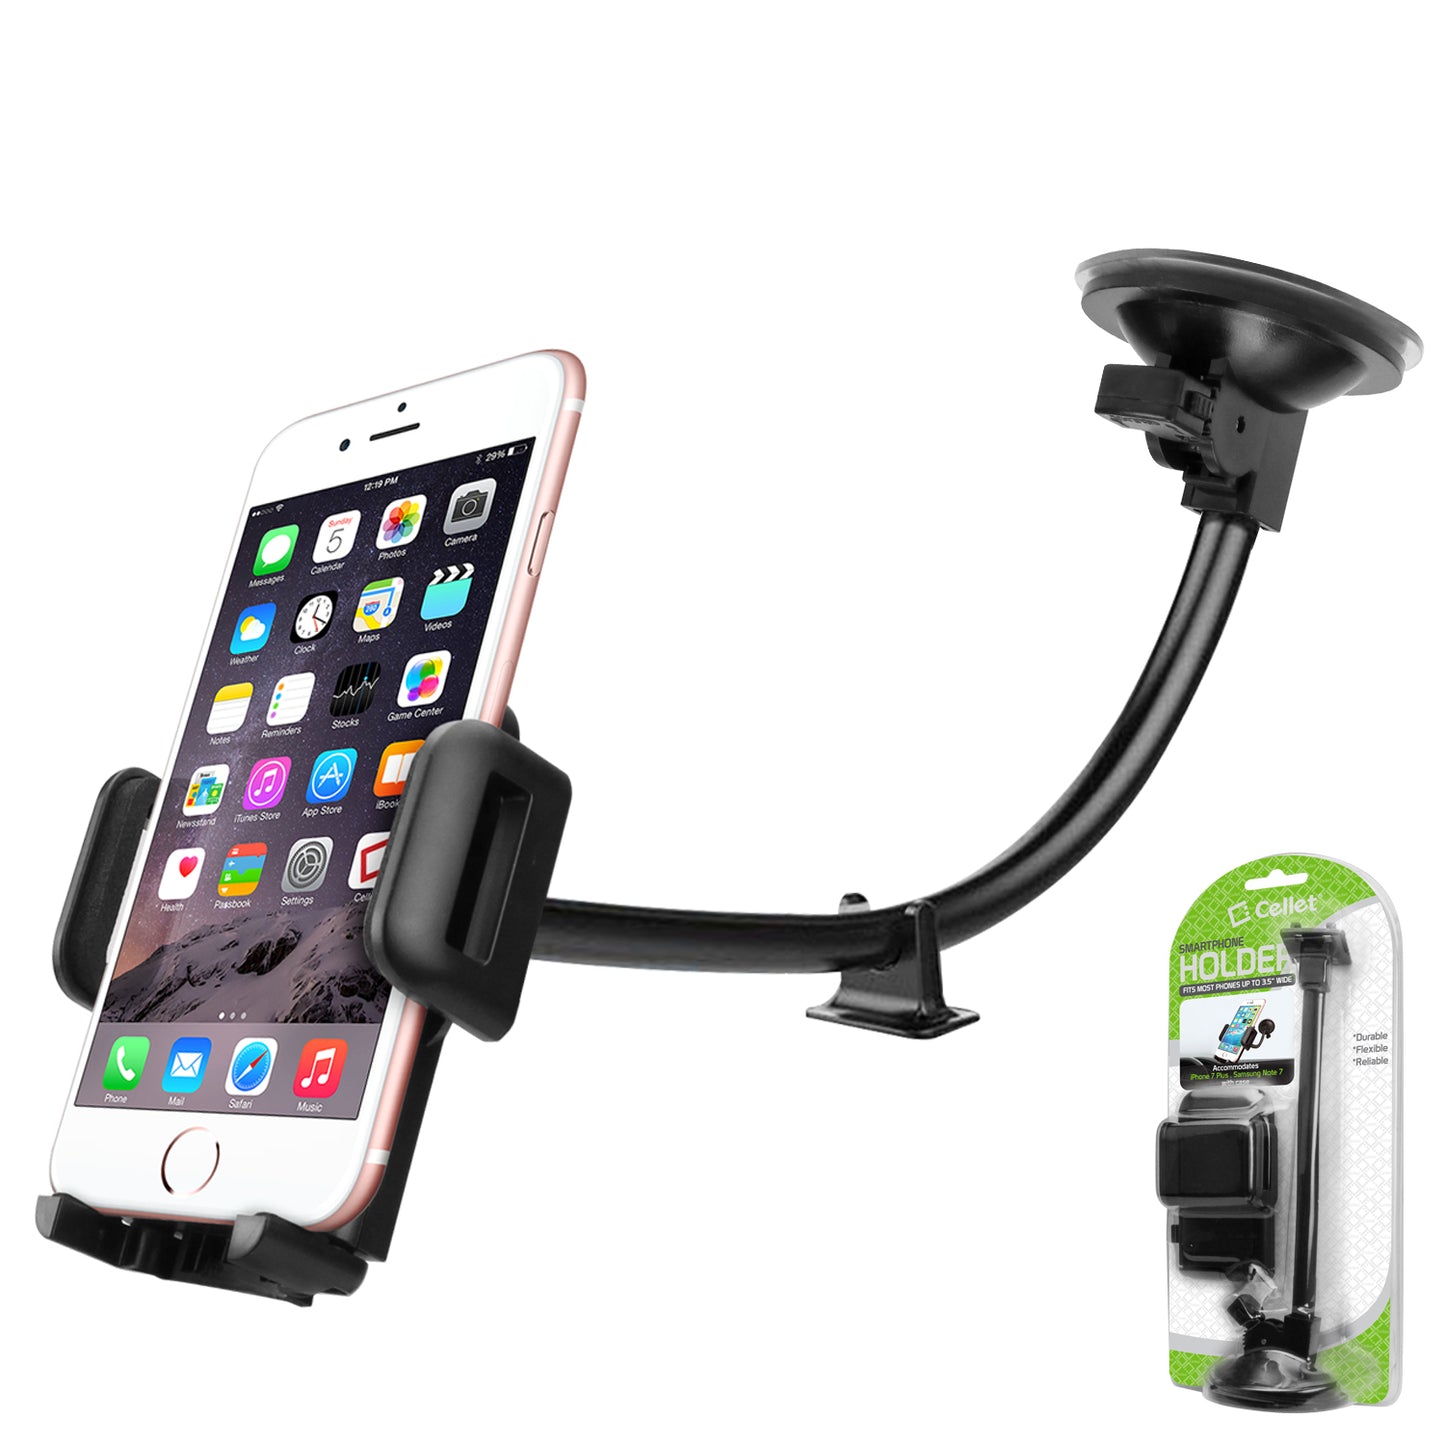 PH5SIL -  Windshield/Dashboard Phone Mount, Heavy Duty Windshield/Dashboard Phone Mount Holder with Reusable Sticky Suction Cup